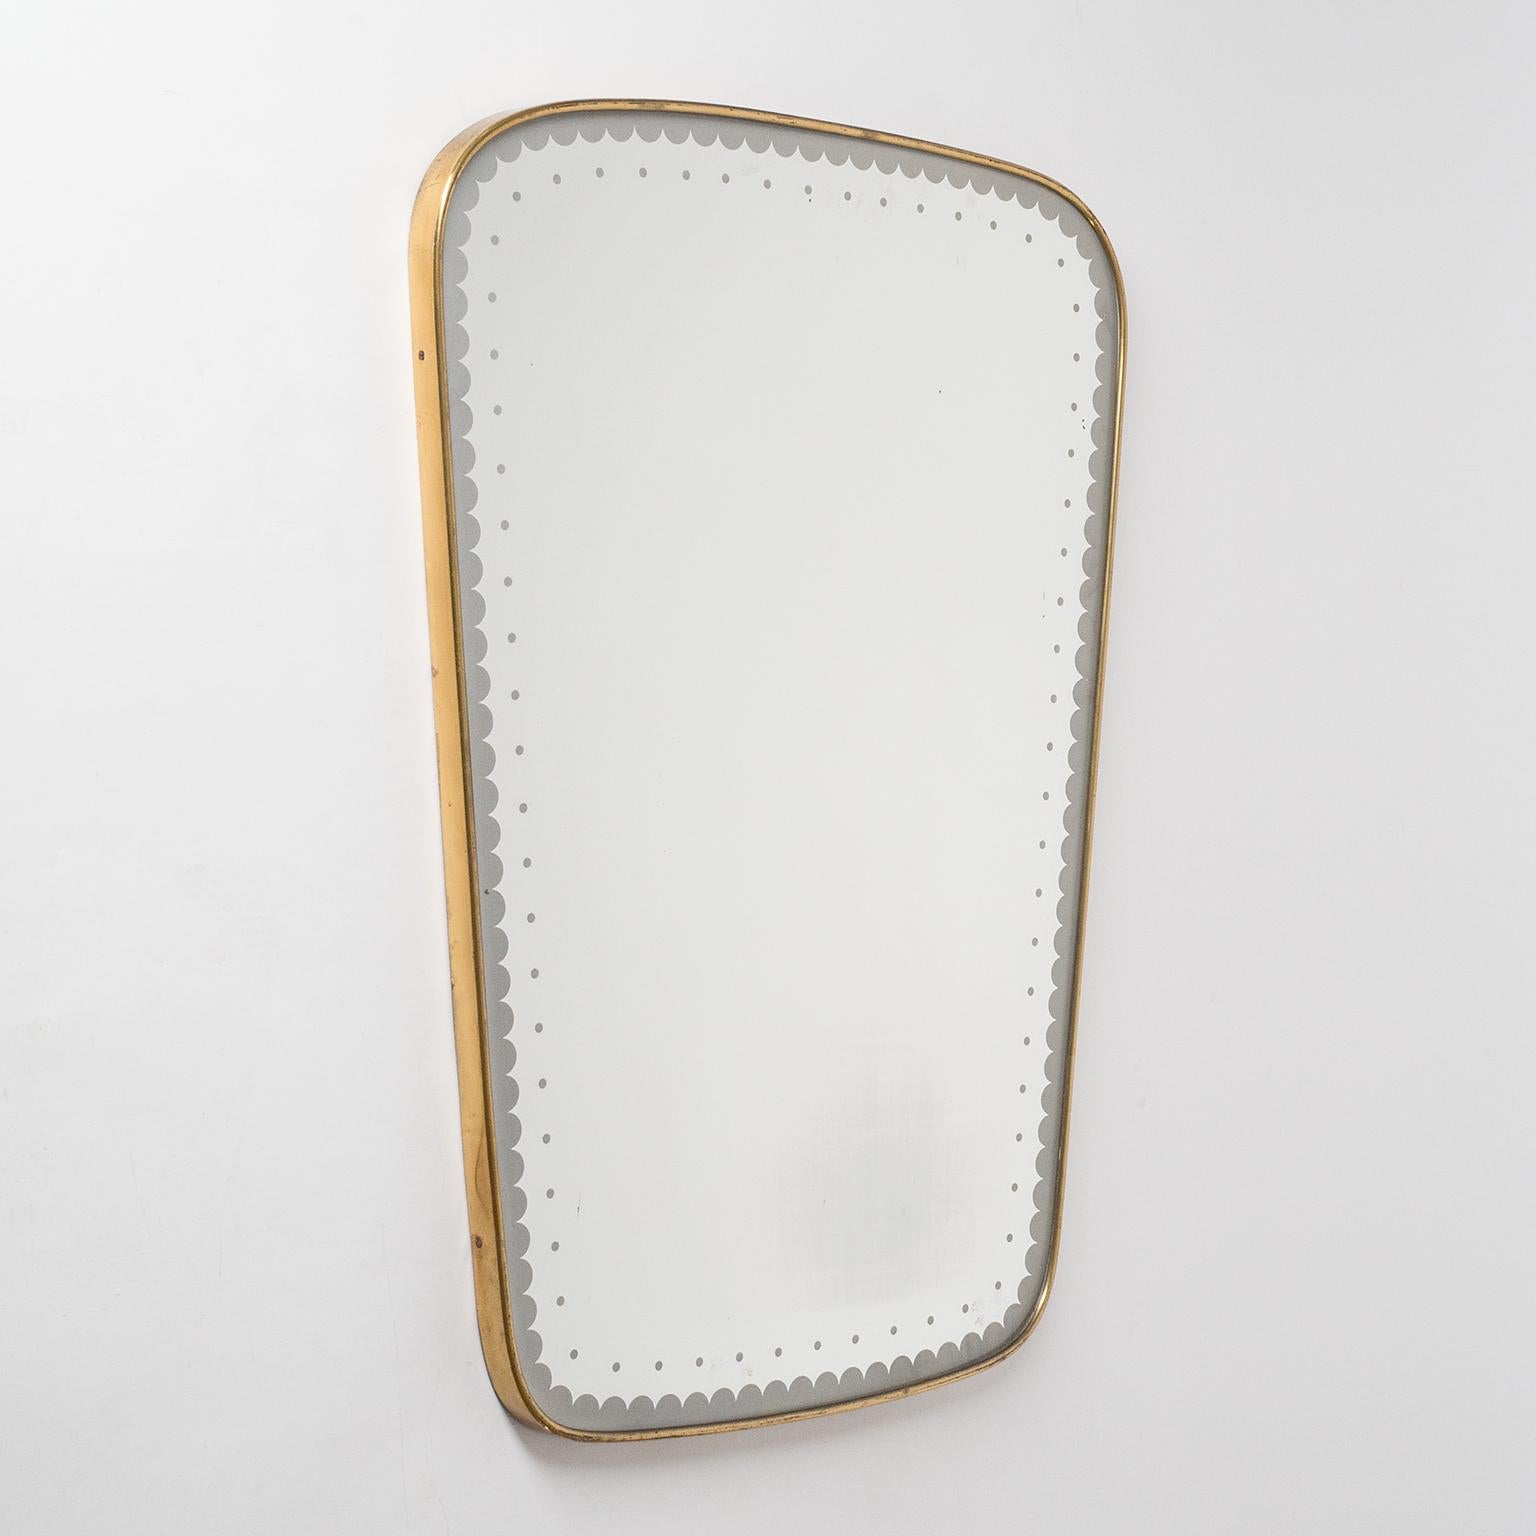 Rare Italian midcentury brass mirror from the 1940-1950s. The mirror has a lovely patterned border which was etched or printed onto the glass before the reflective coating was applied. Very nice original condition with patina on the continuous brass